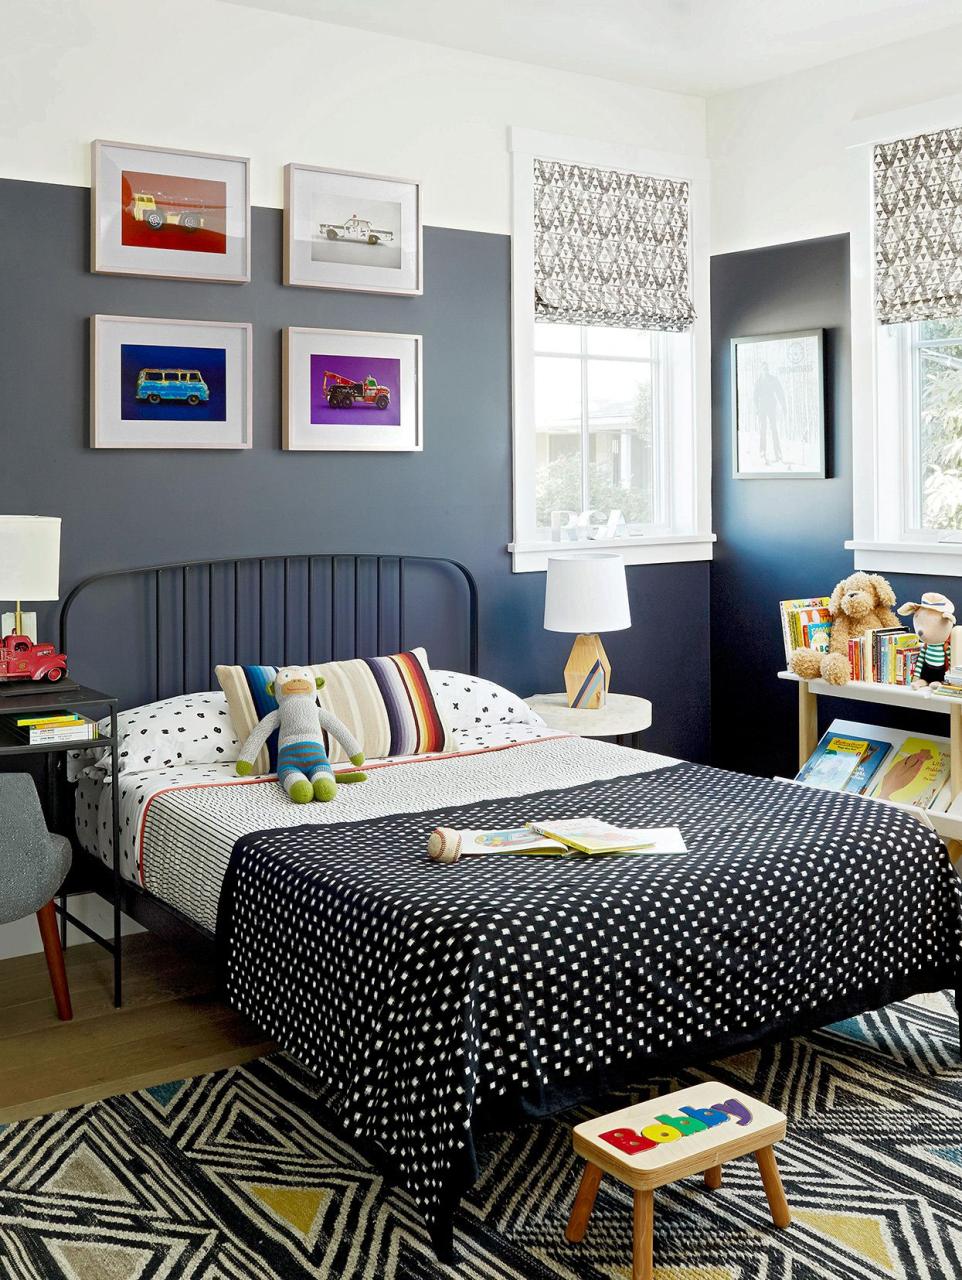 Two-Tone Walls Are The Latest Design Trend We'Re Seeing Everywhere